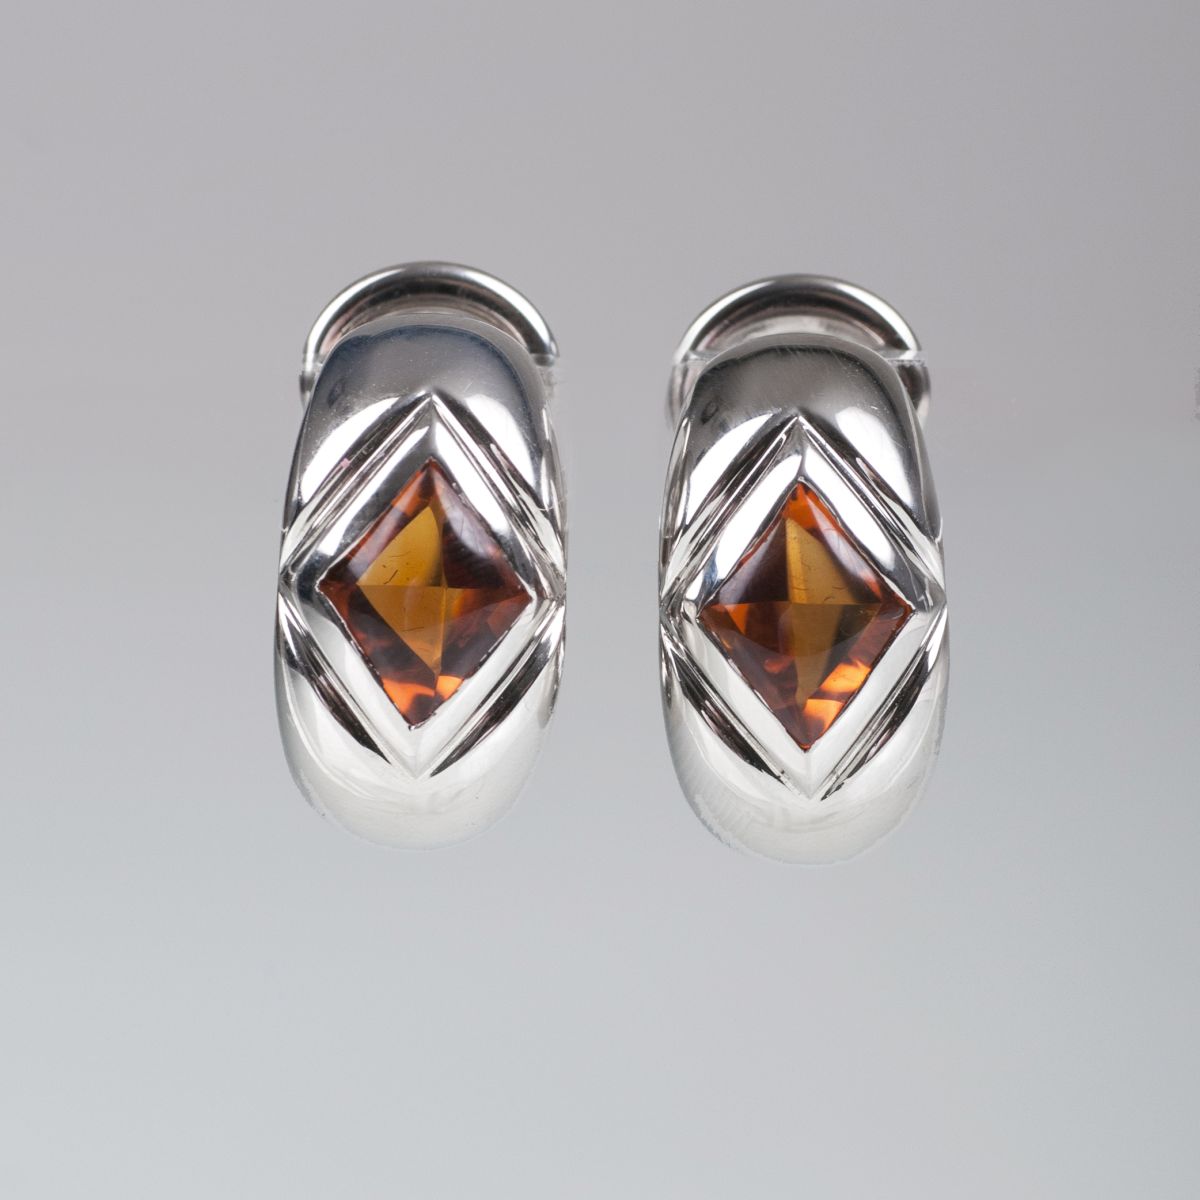 A pair of citrine earrings by Montblanc